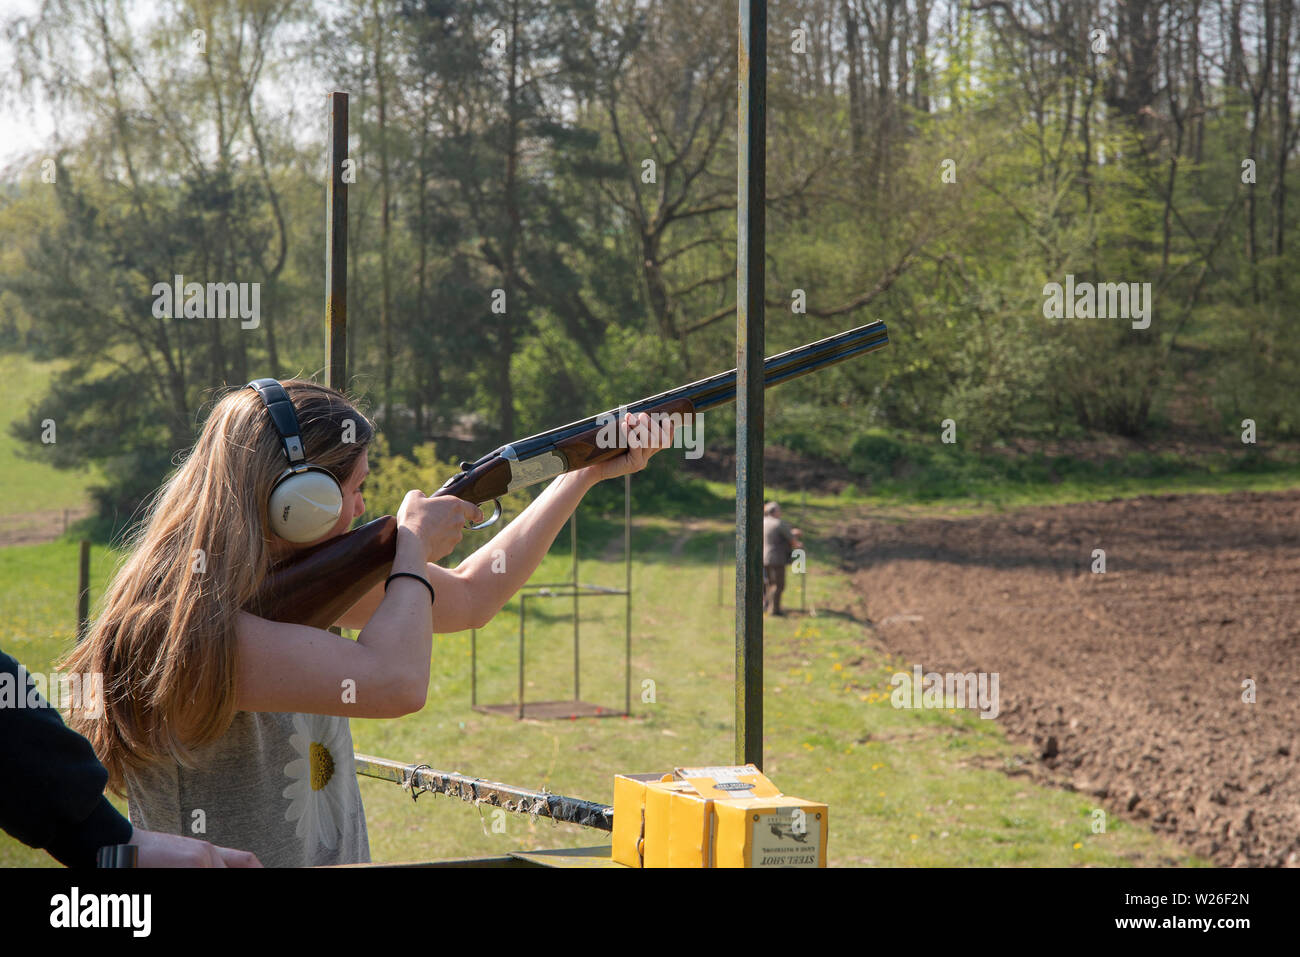 Woman/lady at a clay pigeon shoot with ear defenders taking aim Stock Photo